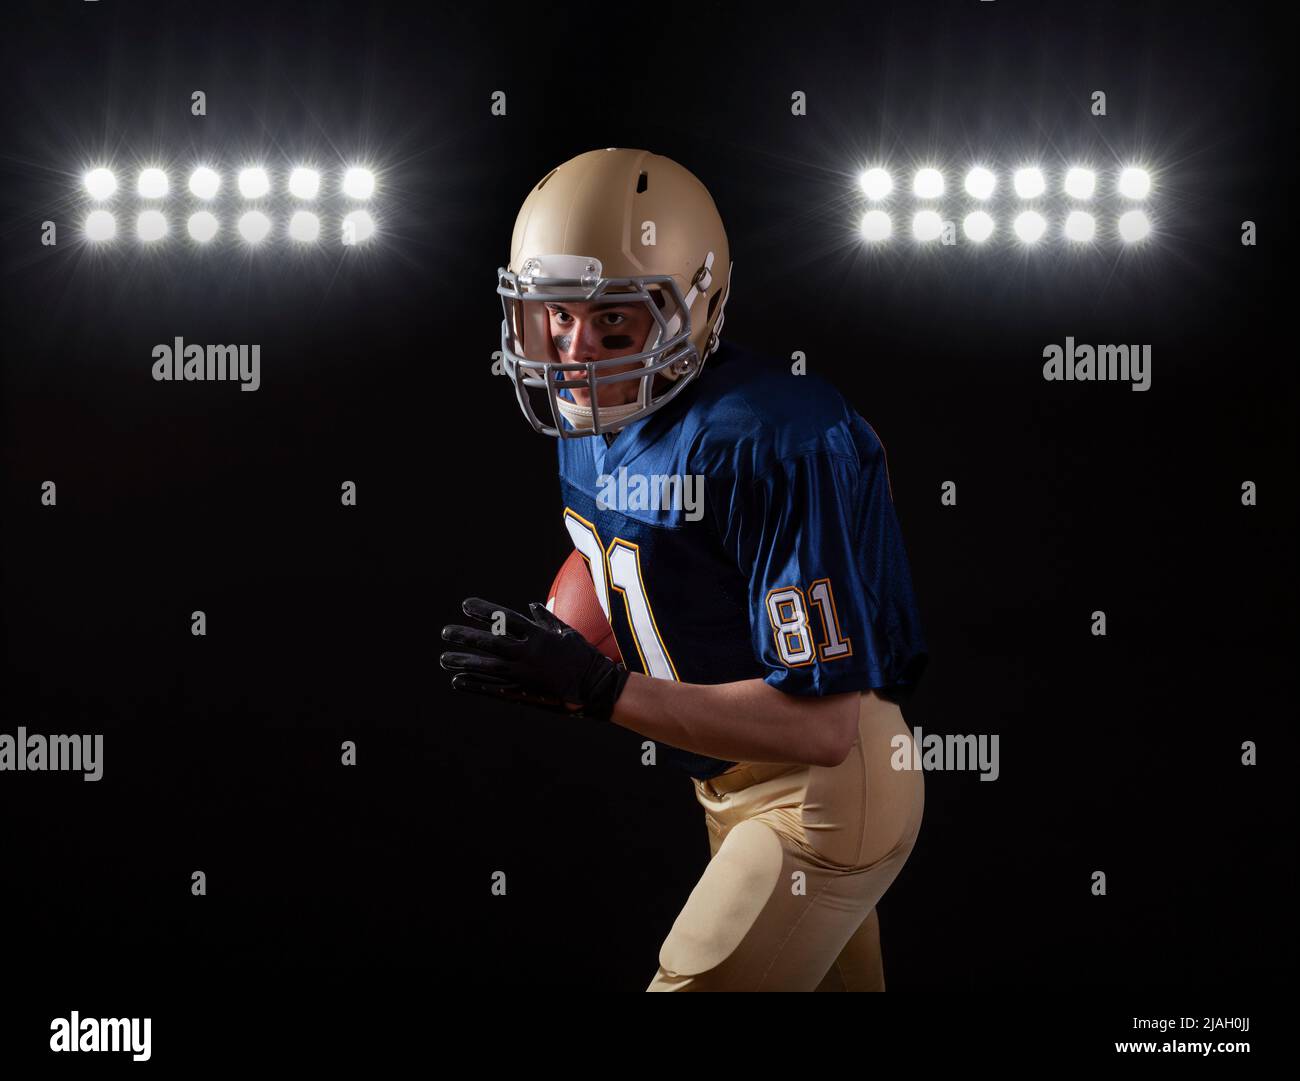 Young football player in running action on a dark background with stadium lights Stock Photo